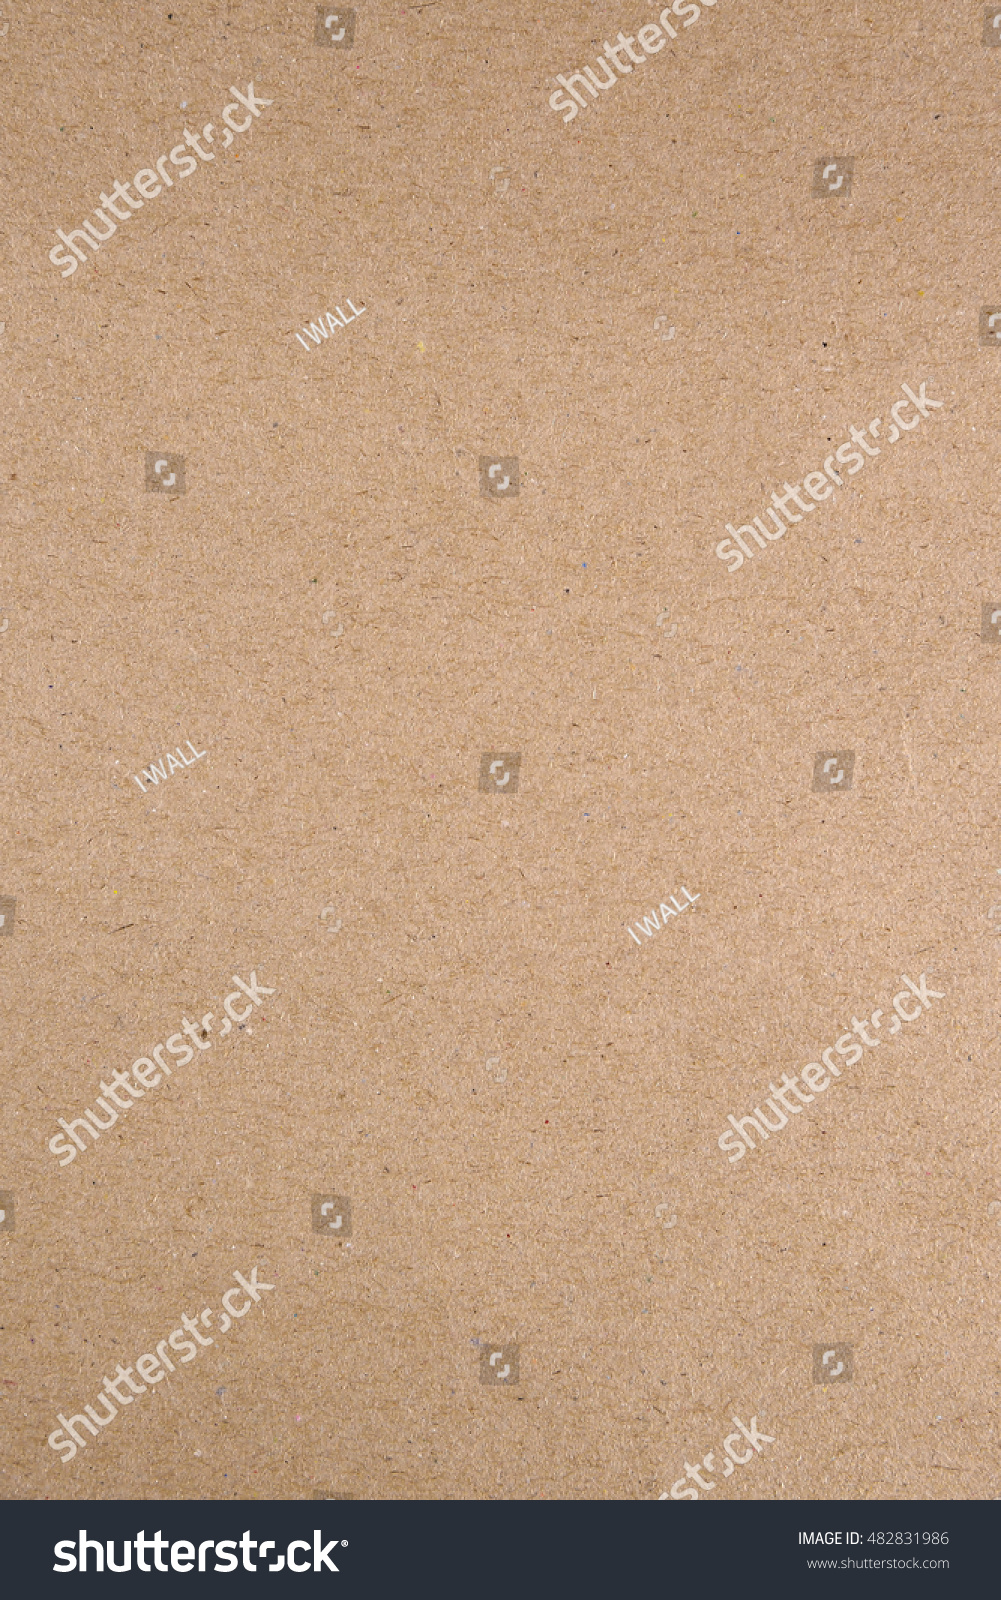 Old paper texture cardboard sheet background #482831986